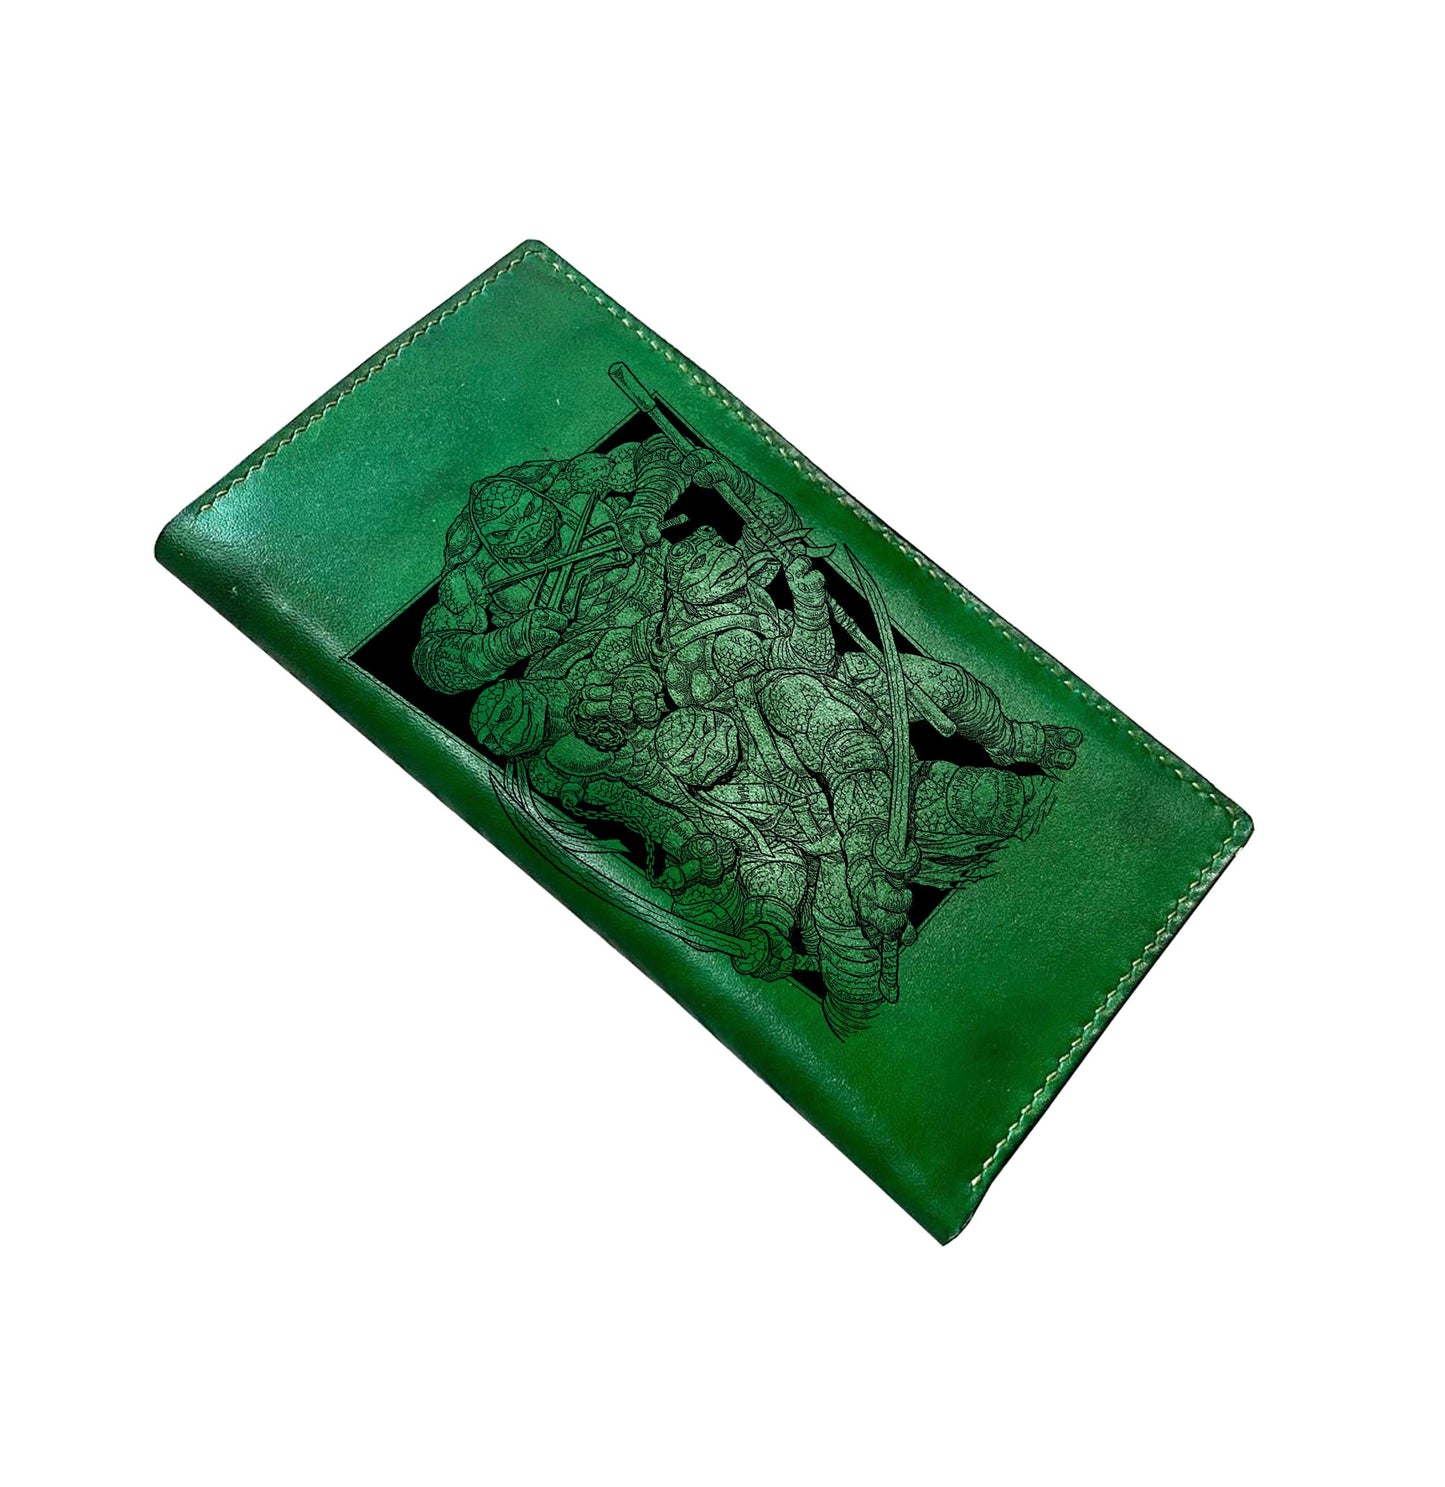 Mayan Corner - Personalized genuine leather handmade wallet, leather gift ideas for him, ninja turtle leather art wallet - 01112214